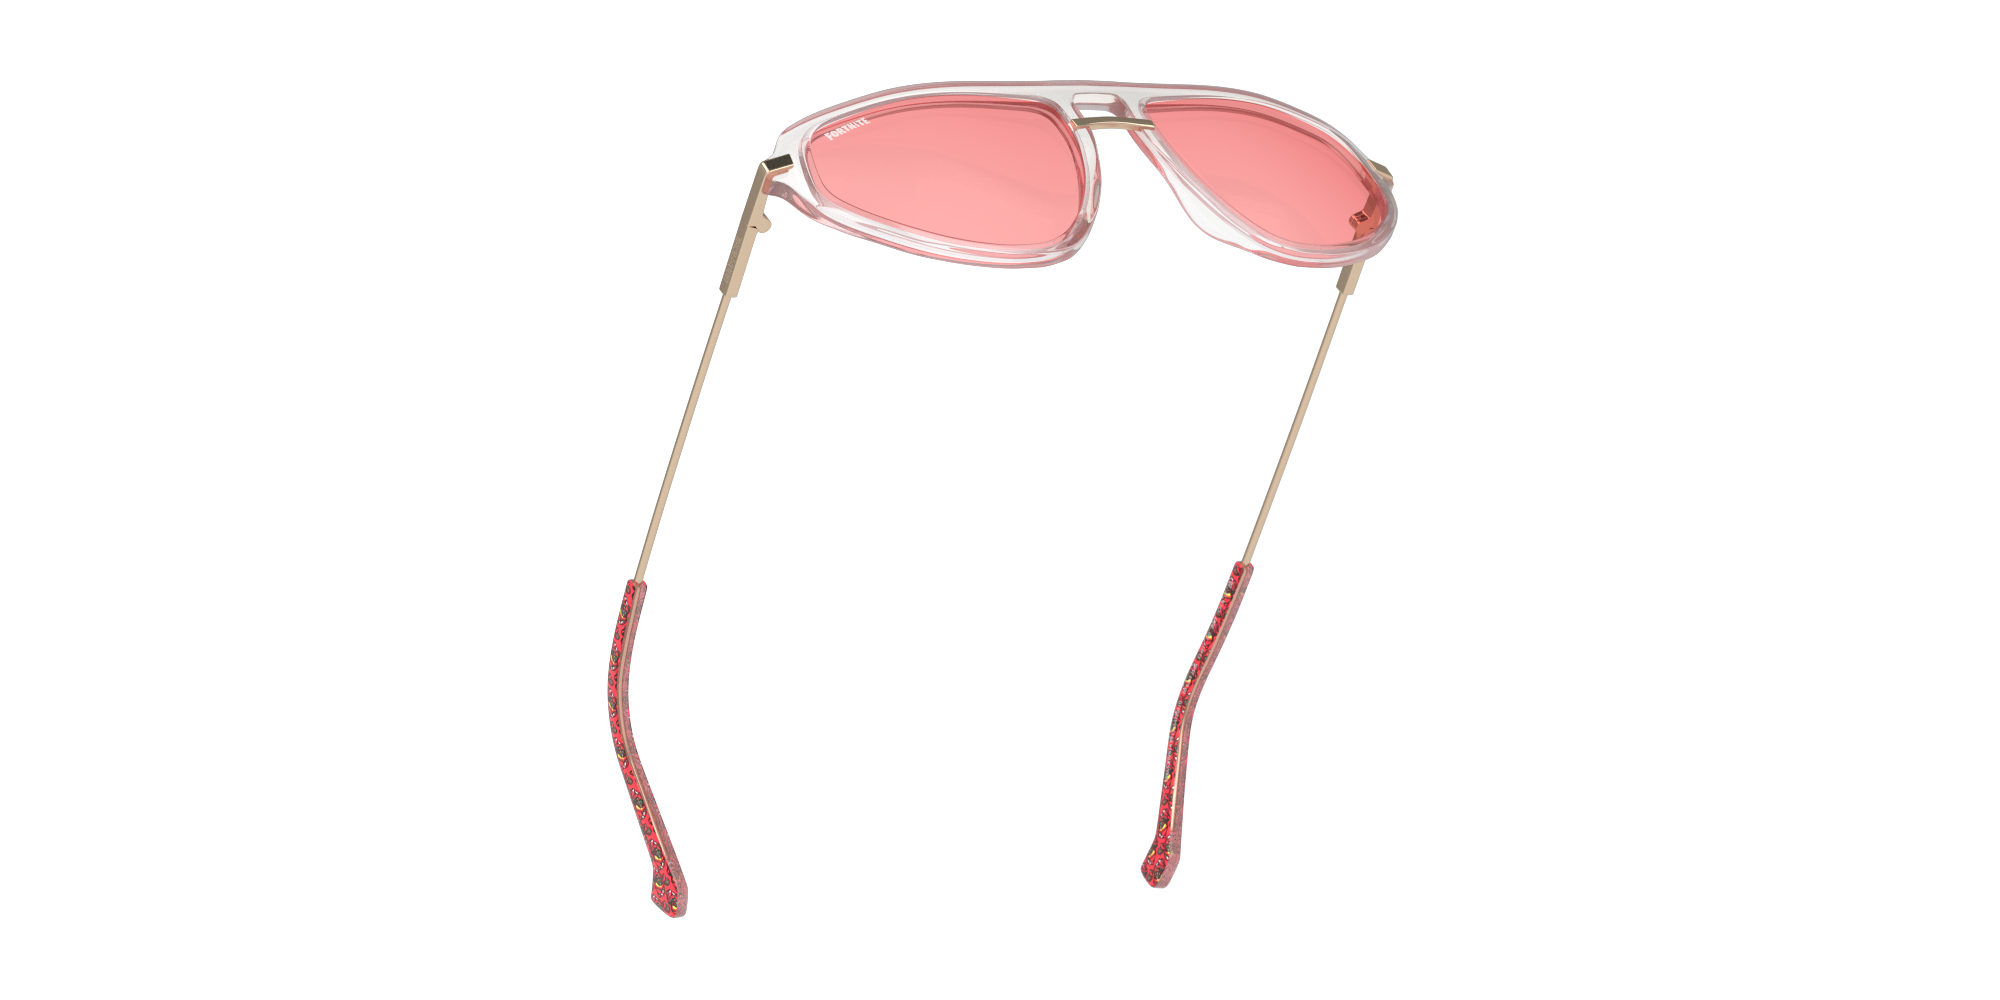 Bottom_Up Fortnite with Unofficial UNSU0147 Sunglasses Pink / Transparent, Clear